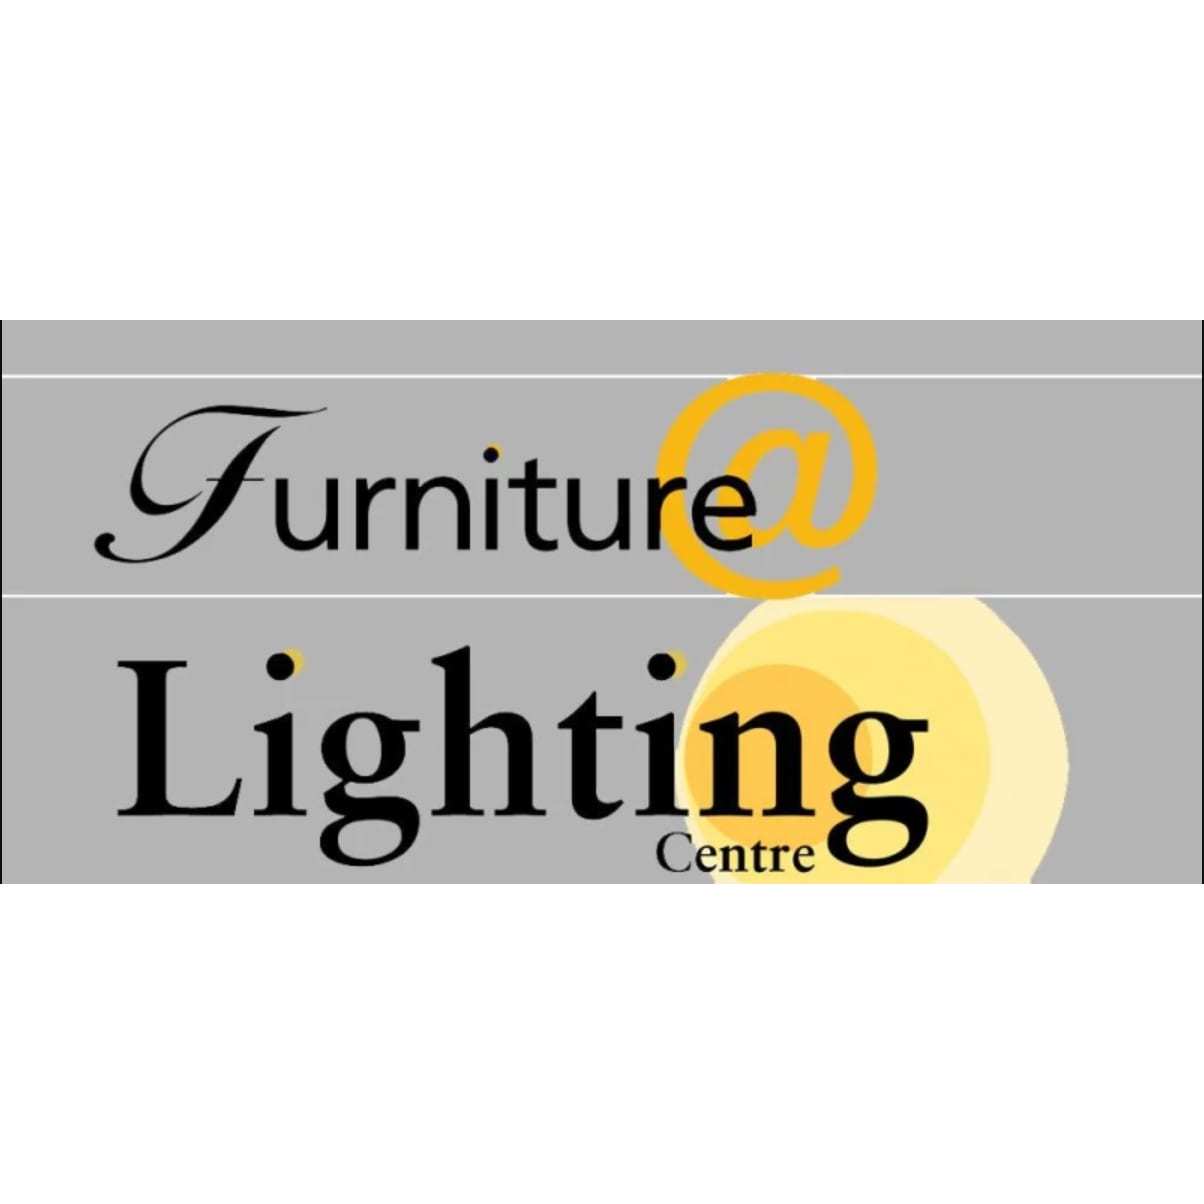 Furniture at the Lighting Centre Logo